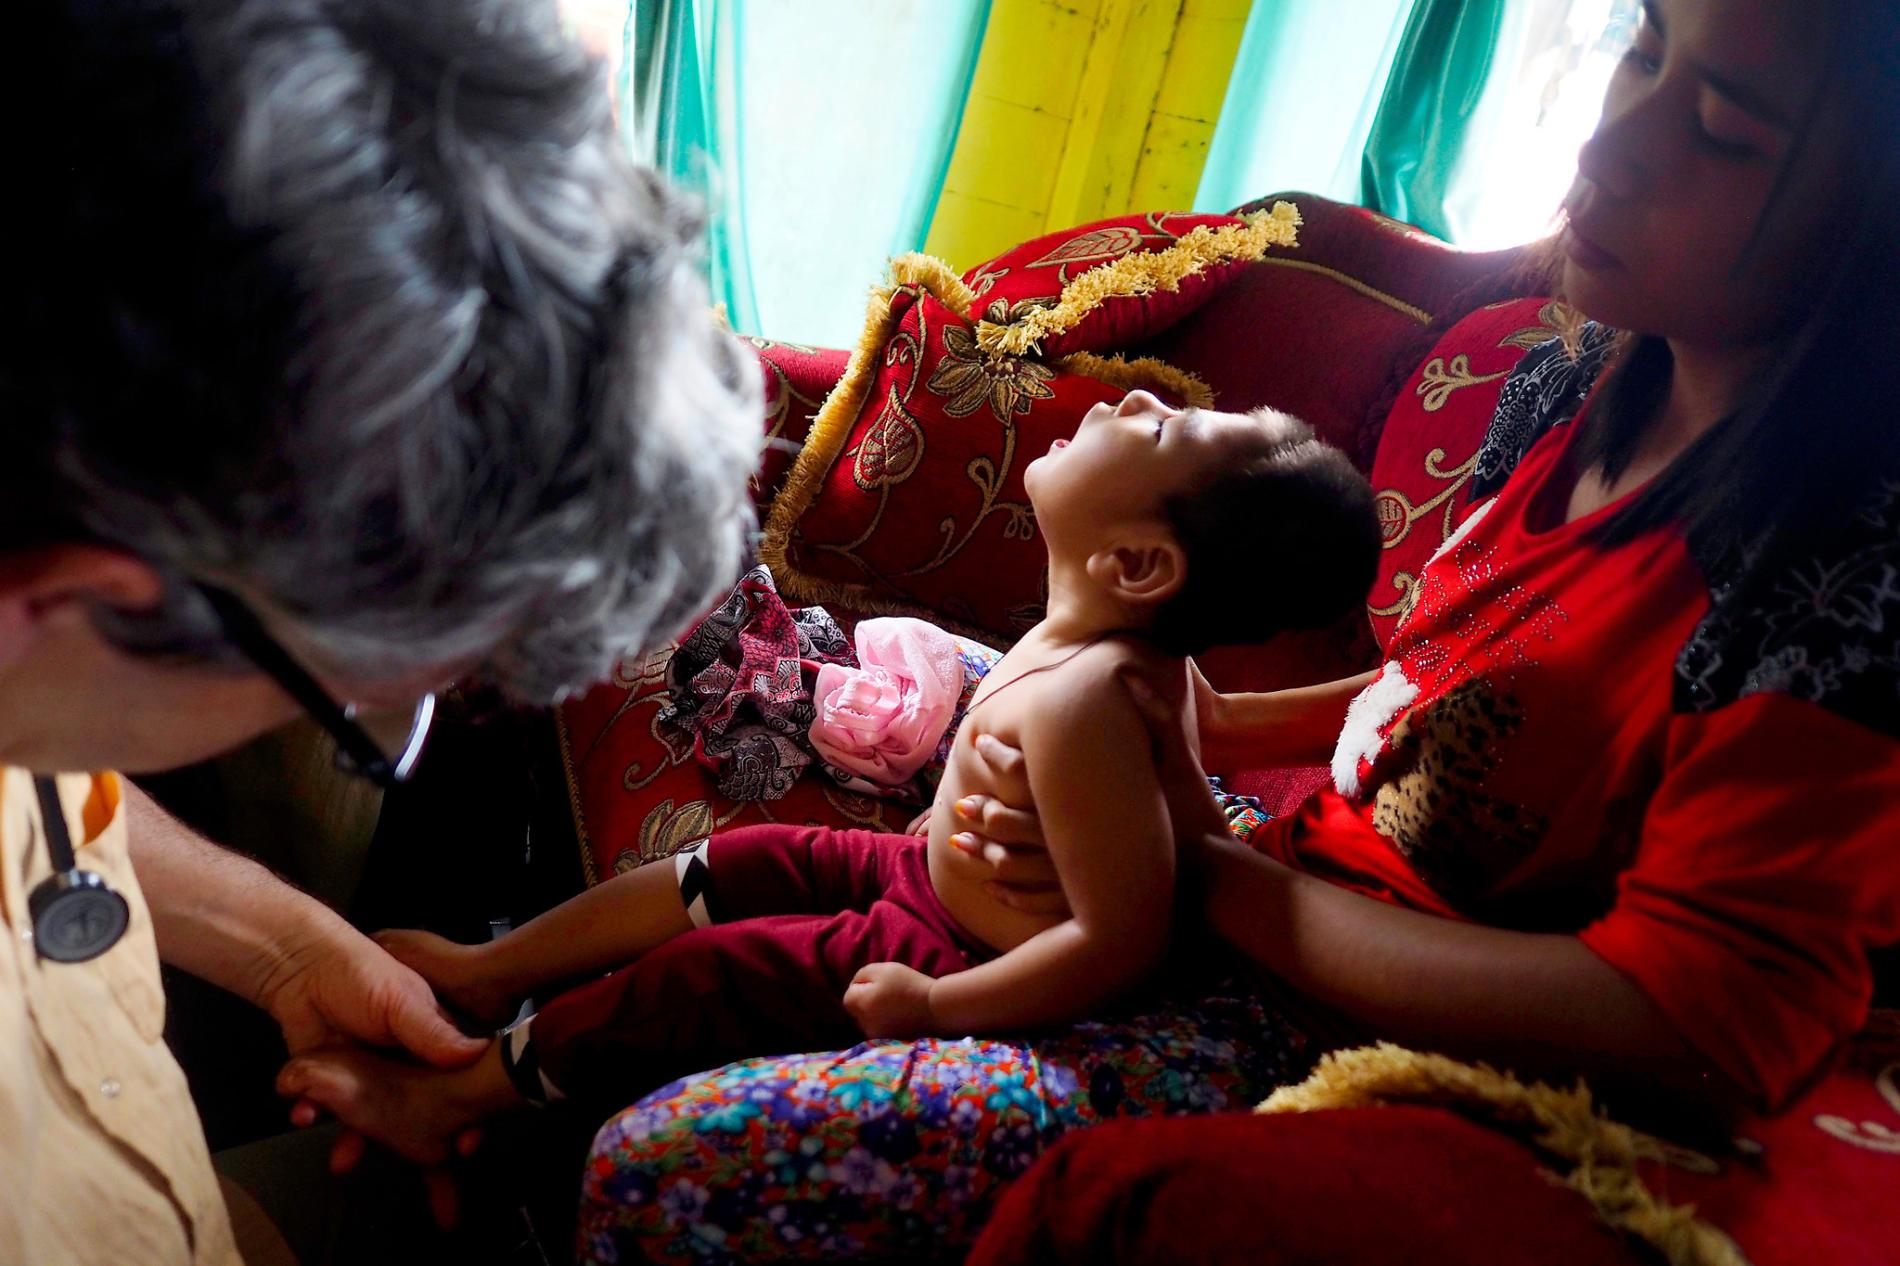 Stephan Bose-O’Reilly, a pediatrician and environmental health expert, examines two-year-old Rifky Aldiansyah, who lives in the village of Cisitu, for symptoms of mercury poisoning. Rifky was in good health until his third month when he began losing motor control. Rifky’s mother, right, who lived in Cisungsang, a nearby mining community, said her home there was surrounded by gold processing centers. Mercury poisoning is “a serious health problem” for children in Indonesia, Bose-O’Reilly says. Image by Larry Price. Indonesia, 2015.